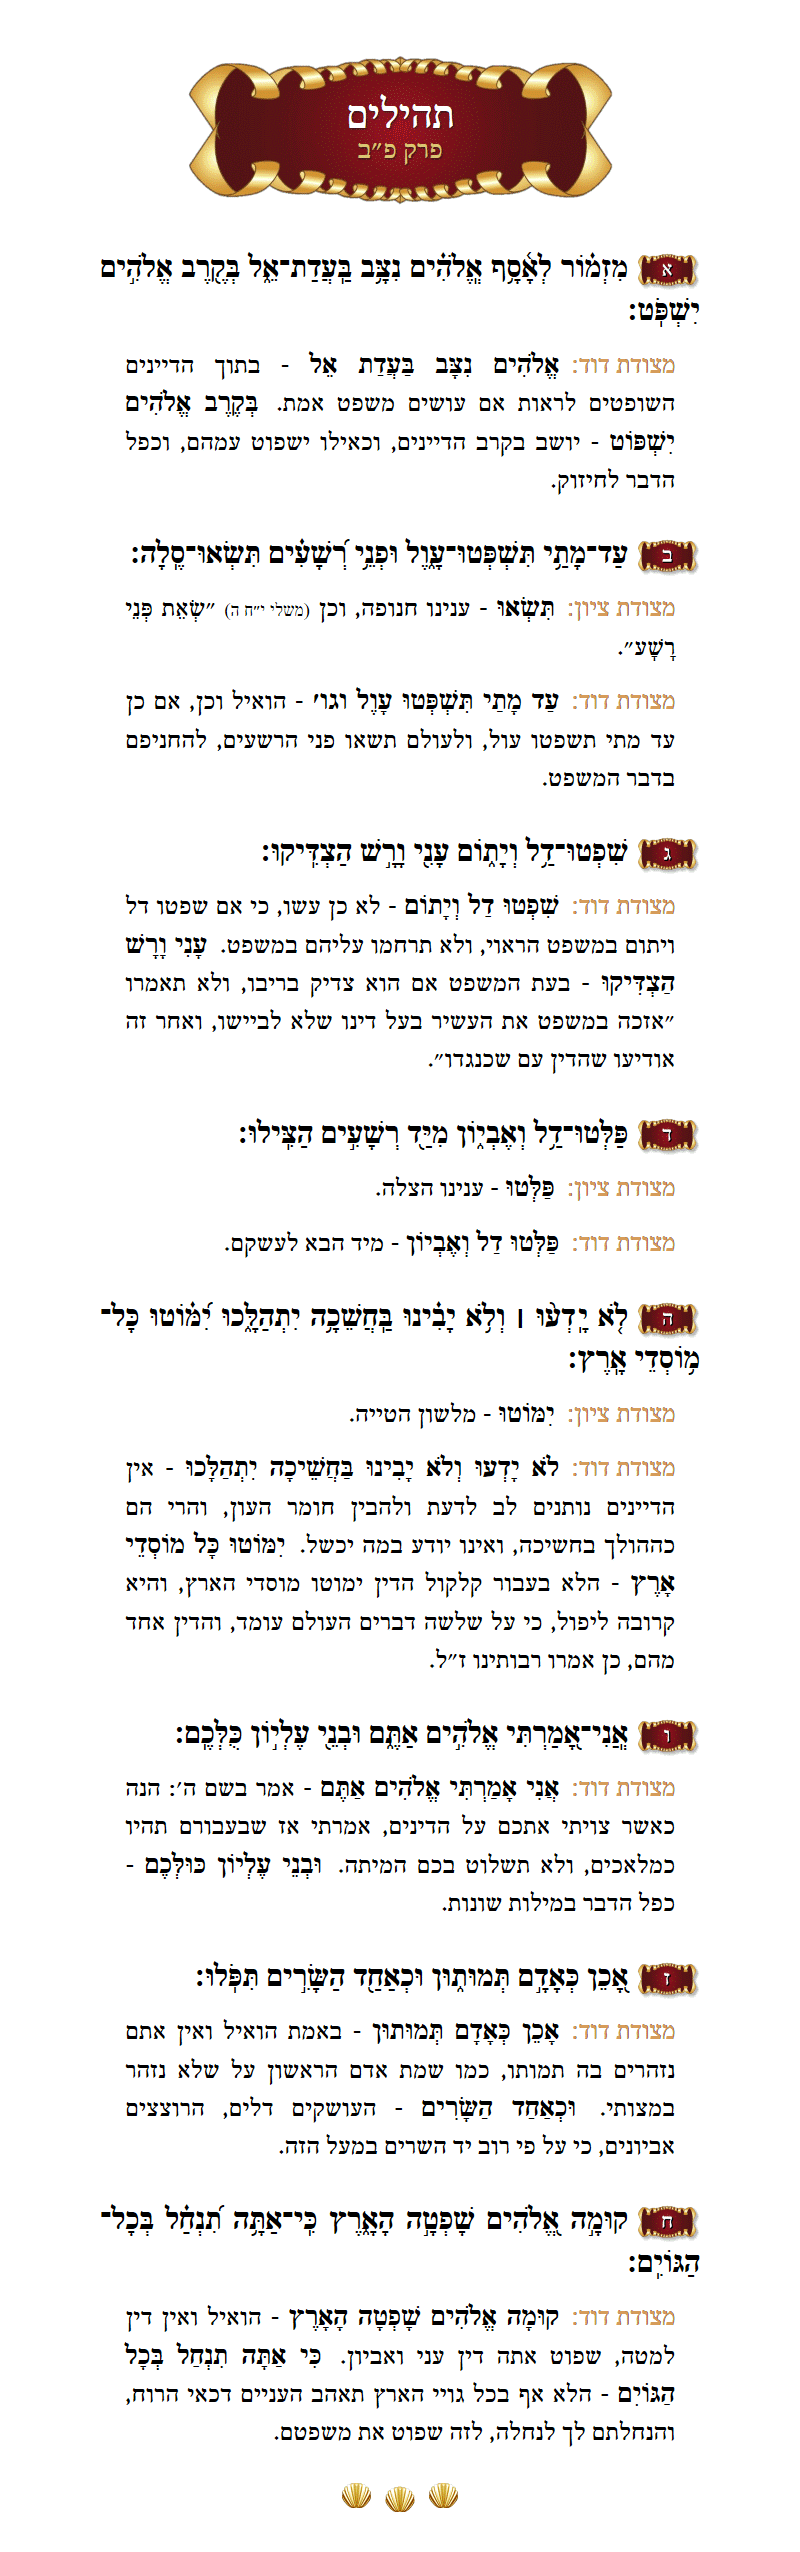 Sefer Tehillim Chapter 82 with commentary